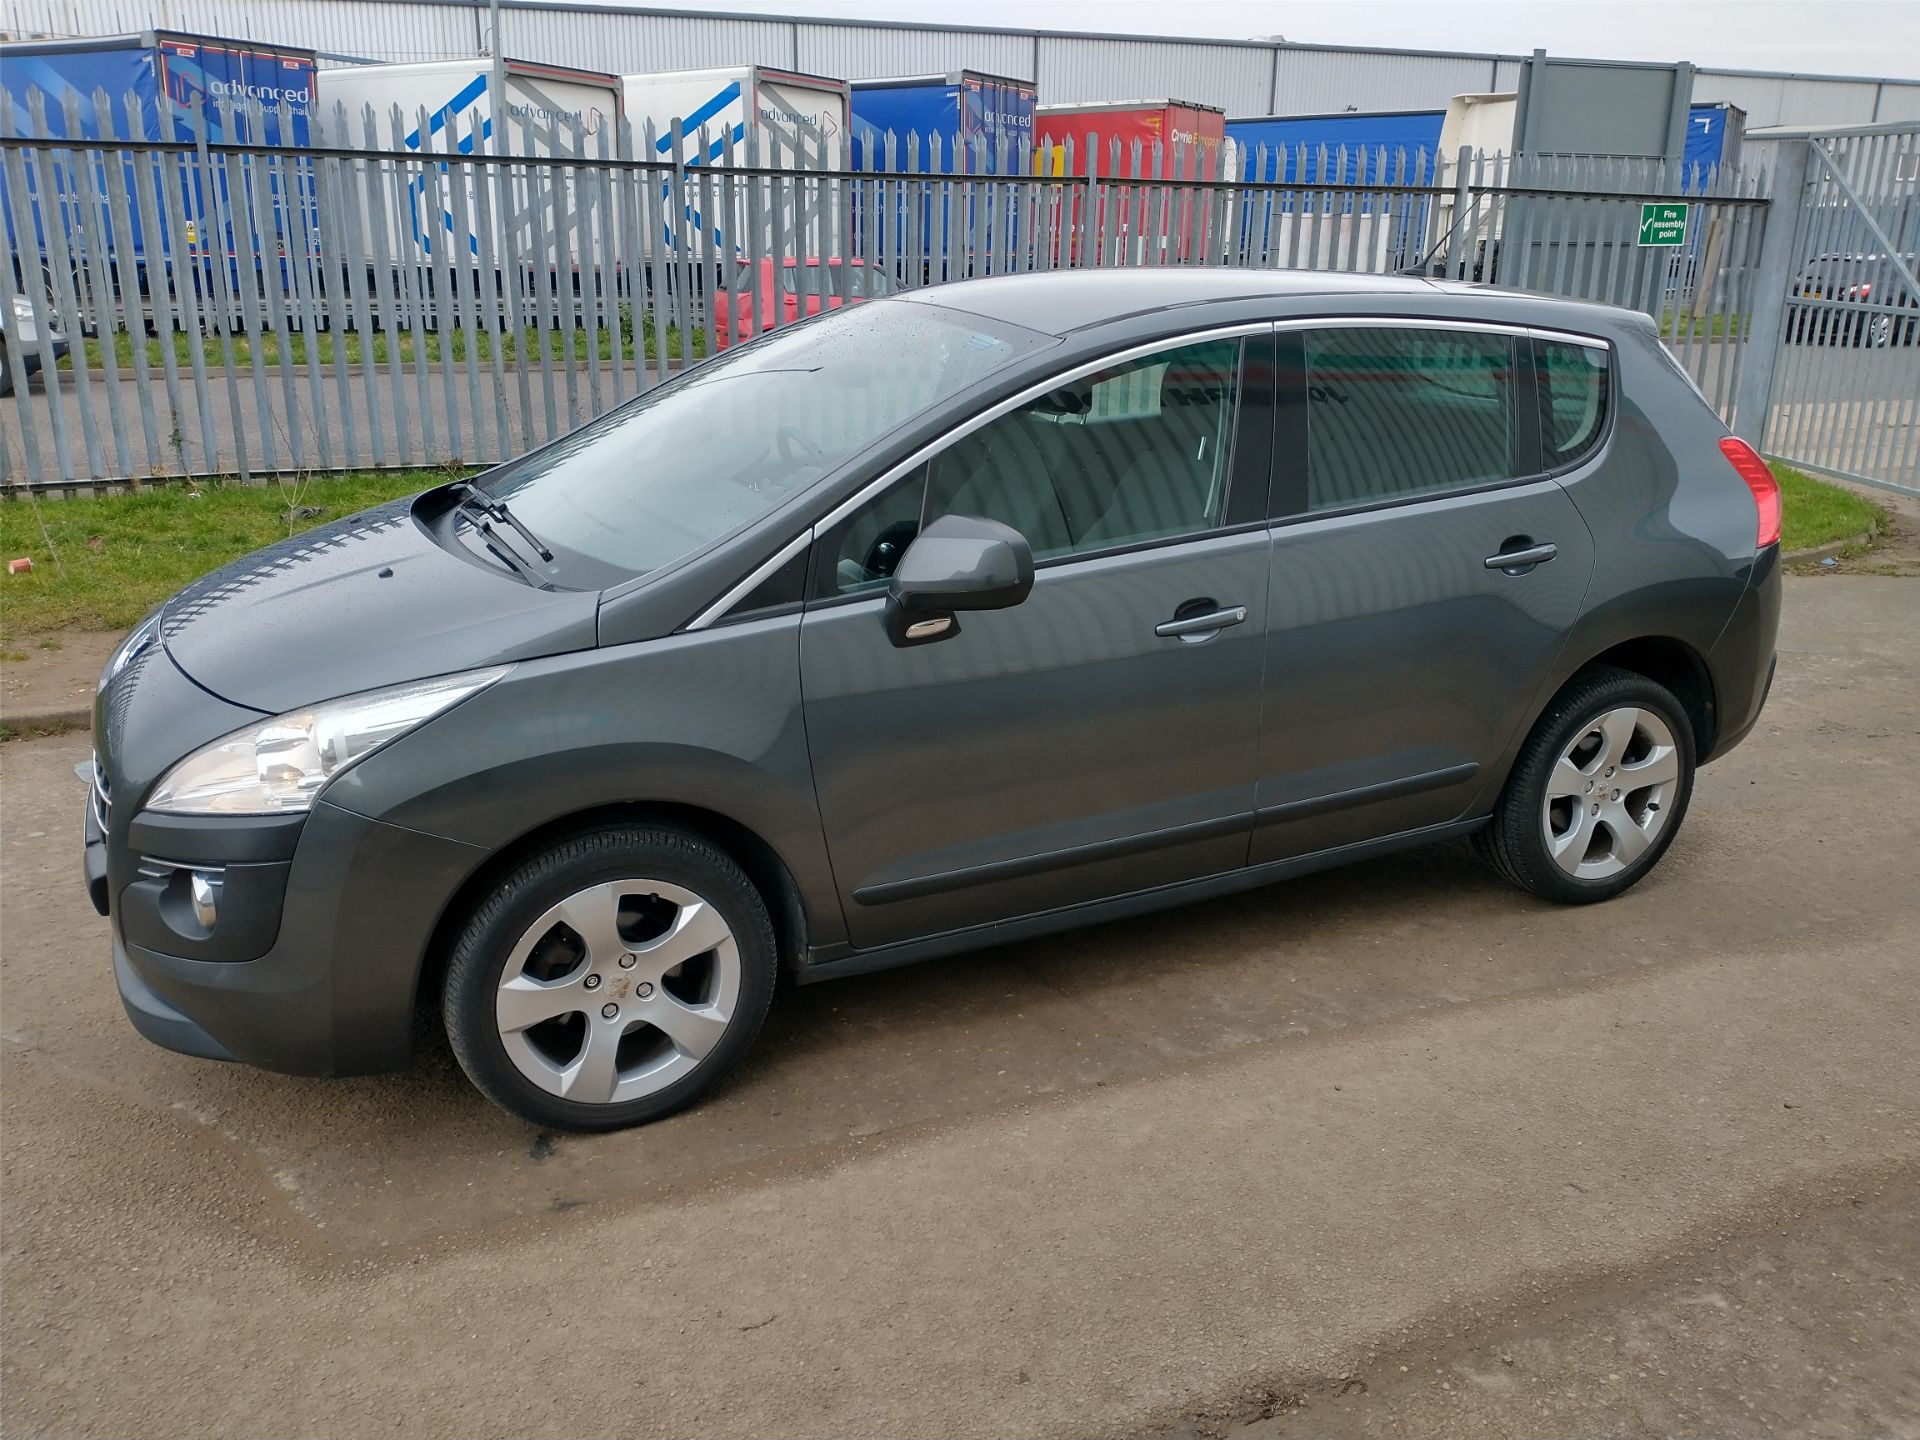 2012 Peugeot 3008 Active HDI 1.6 5DR SUV - CL505 - NO VAT ON THE HAMM - Image 7 of 19